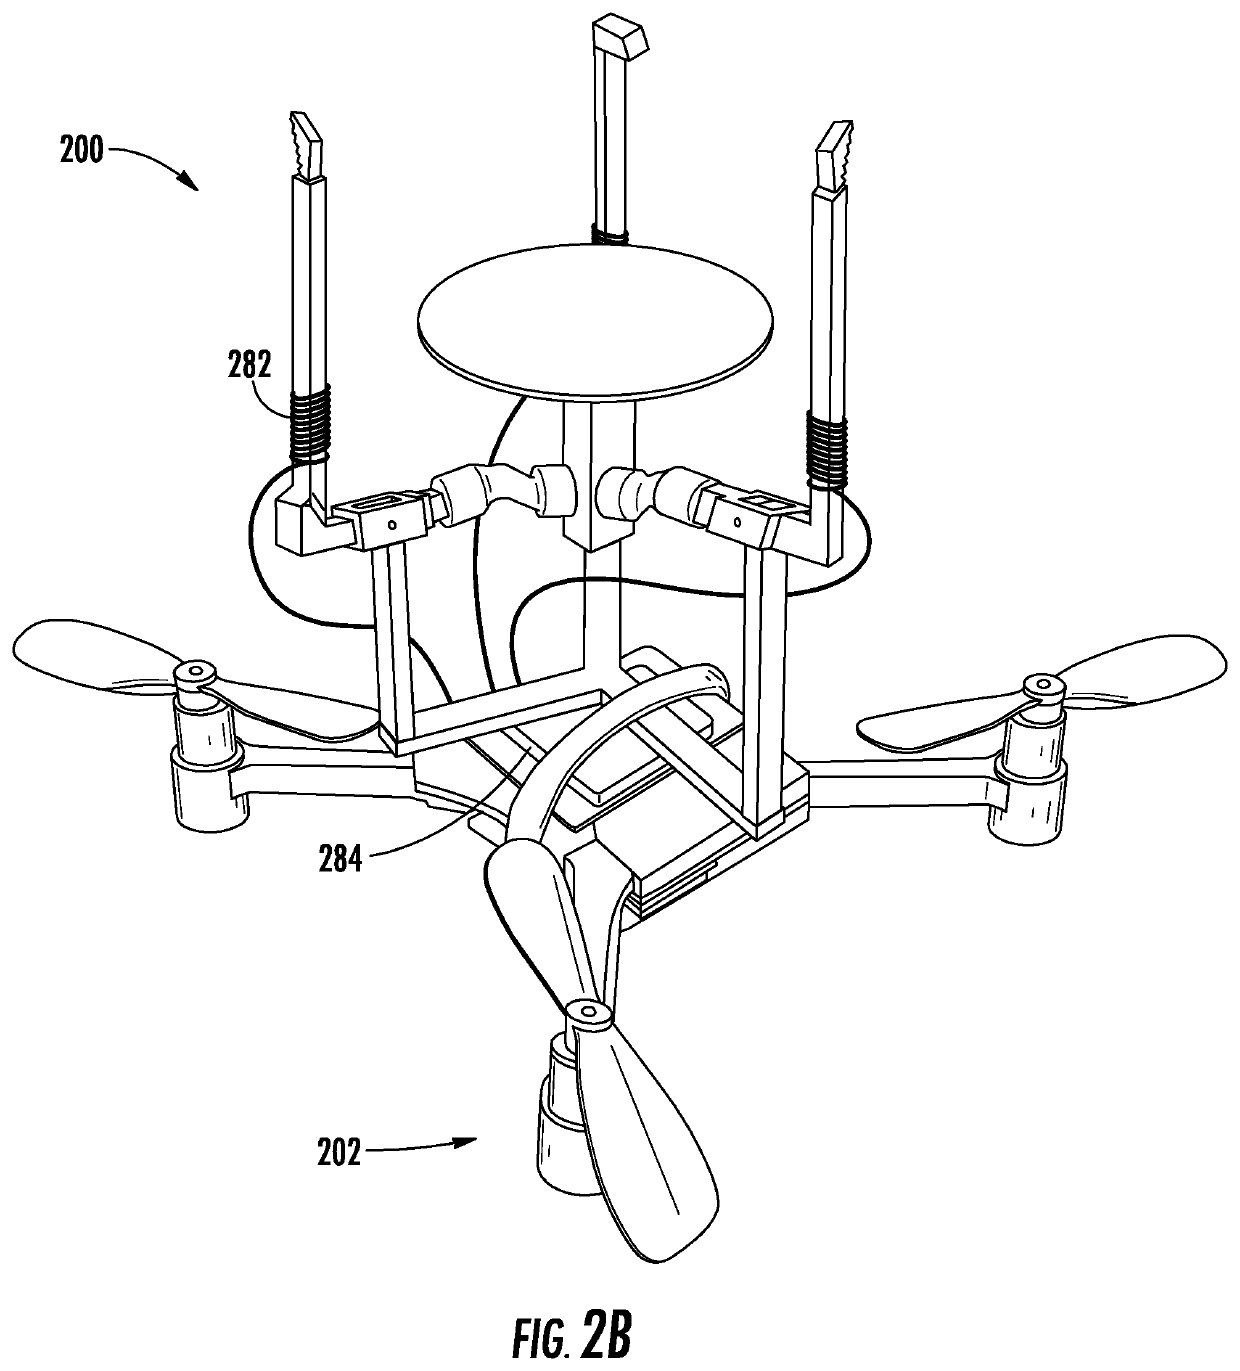 Compliant bistable gripper for aerial perching and grasping